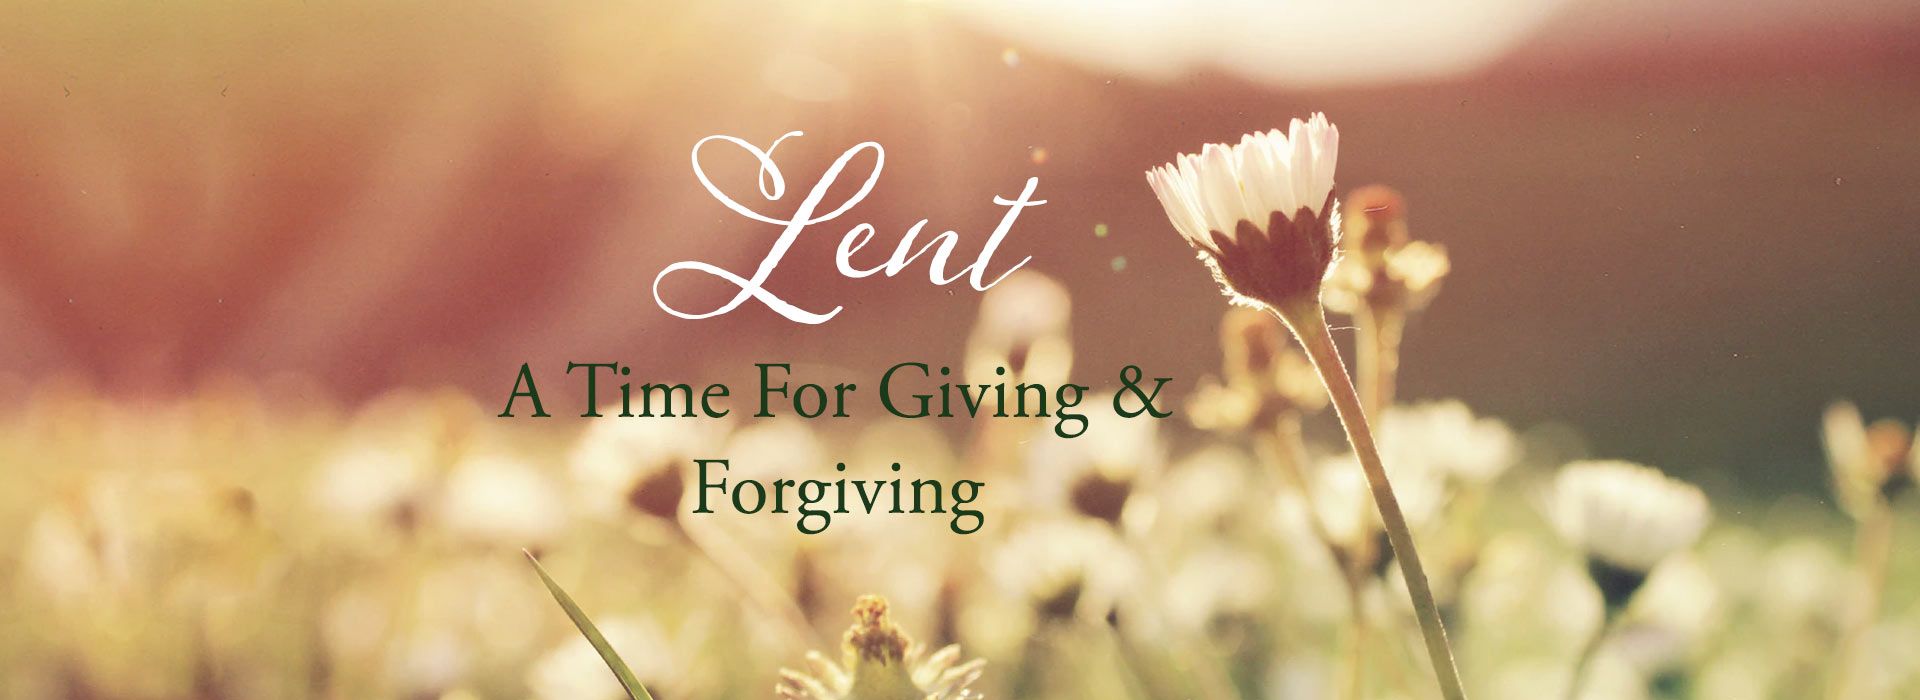 A Time for Giving and Forgiving